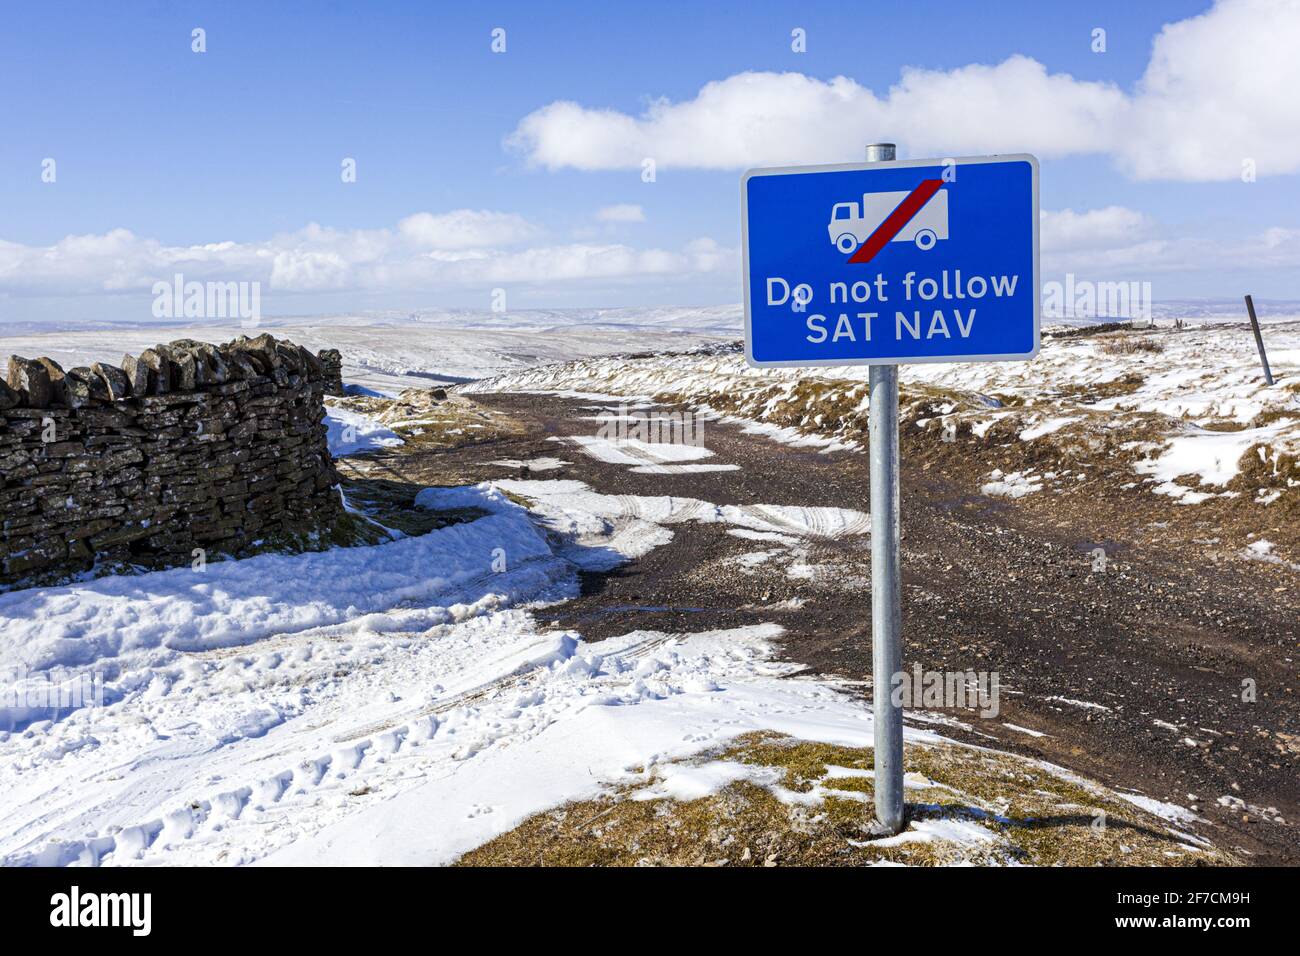 The Pennines in winter - A Do Not Follow Sat Nav sign for lorries on a track in a snowy landscape near Nenthead, Cumbria UK Stock Photo